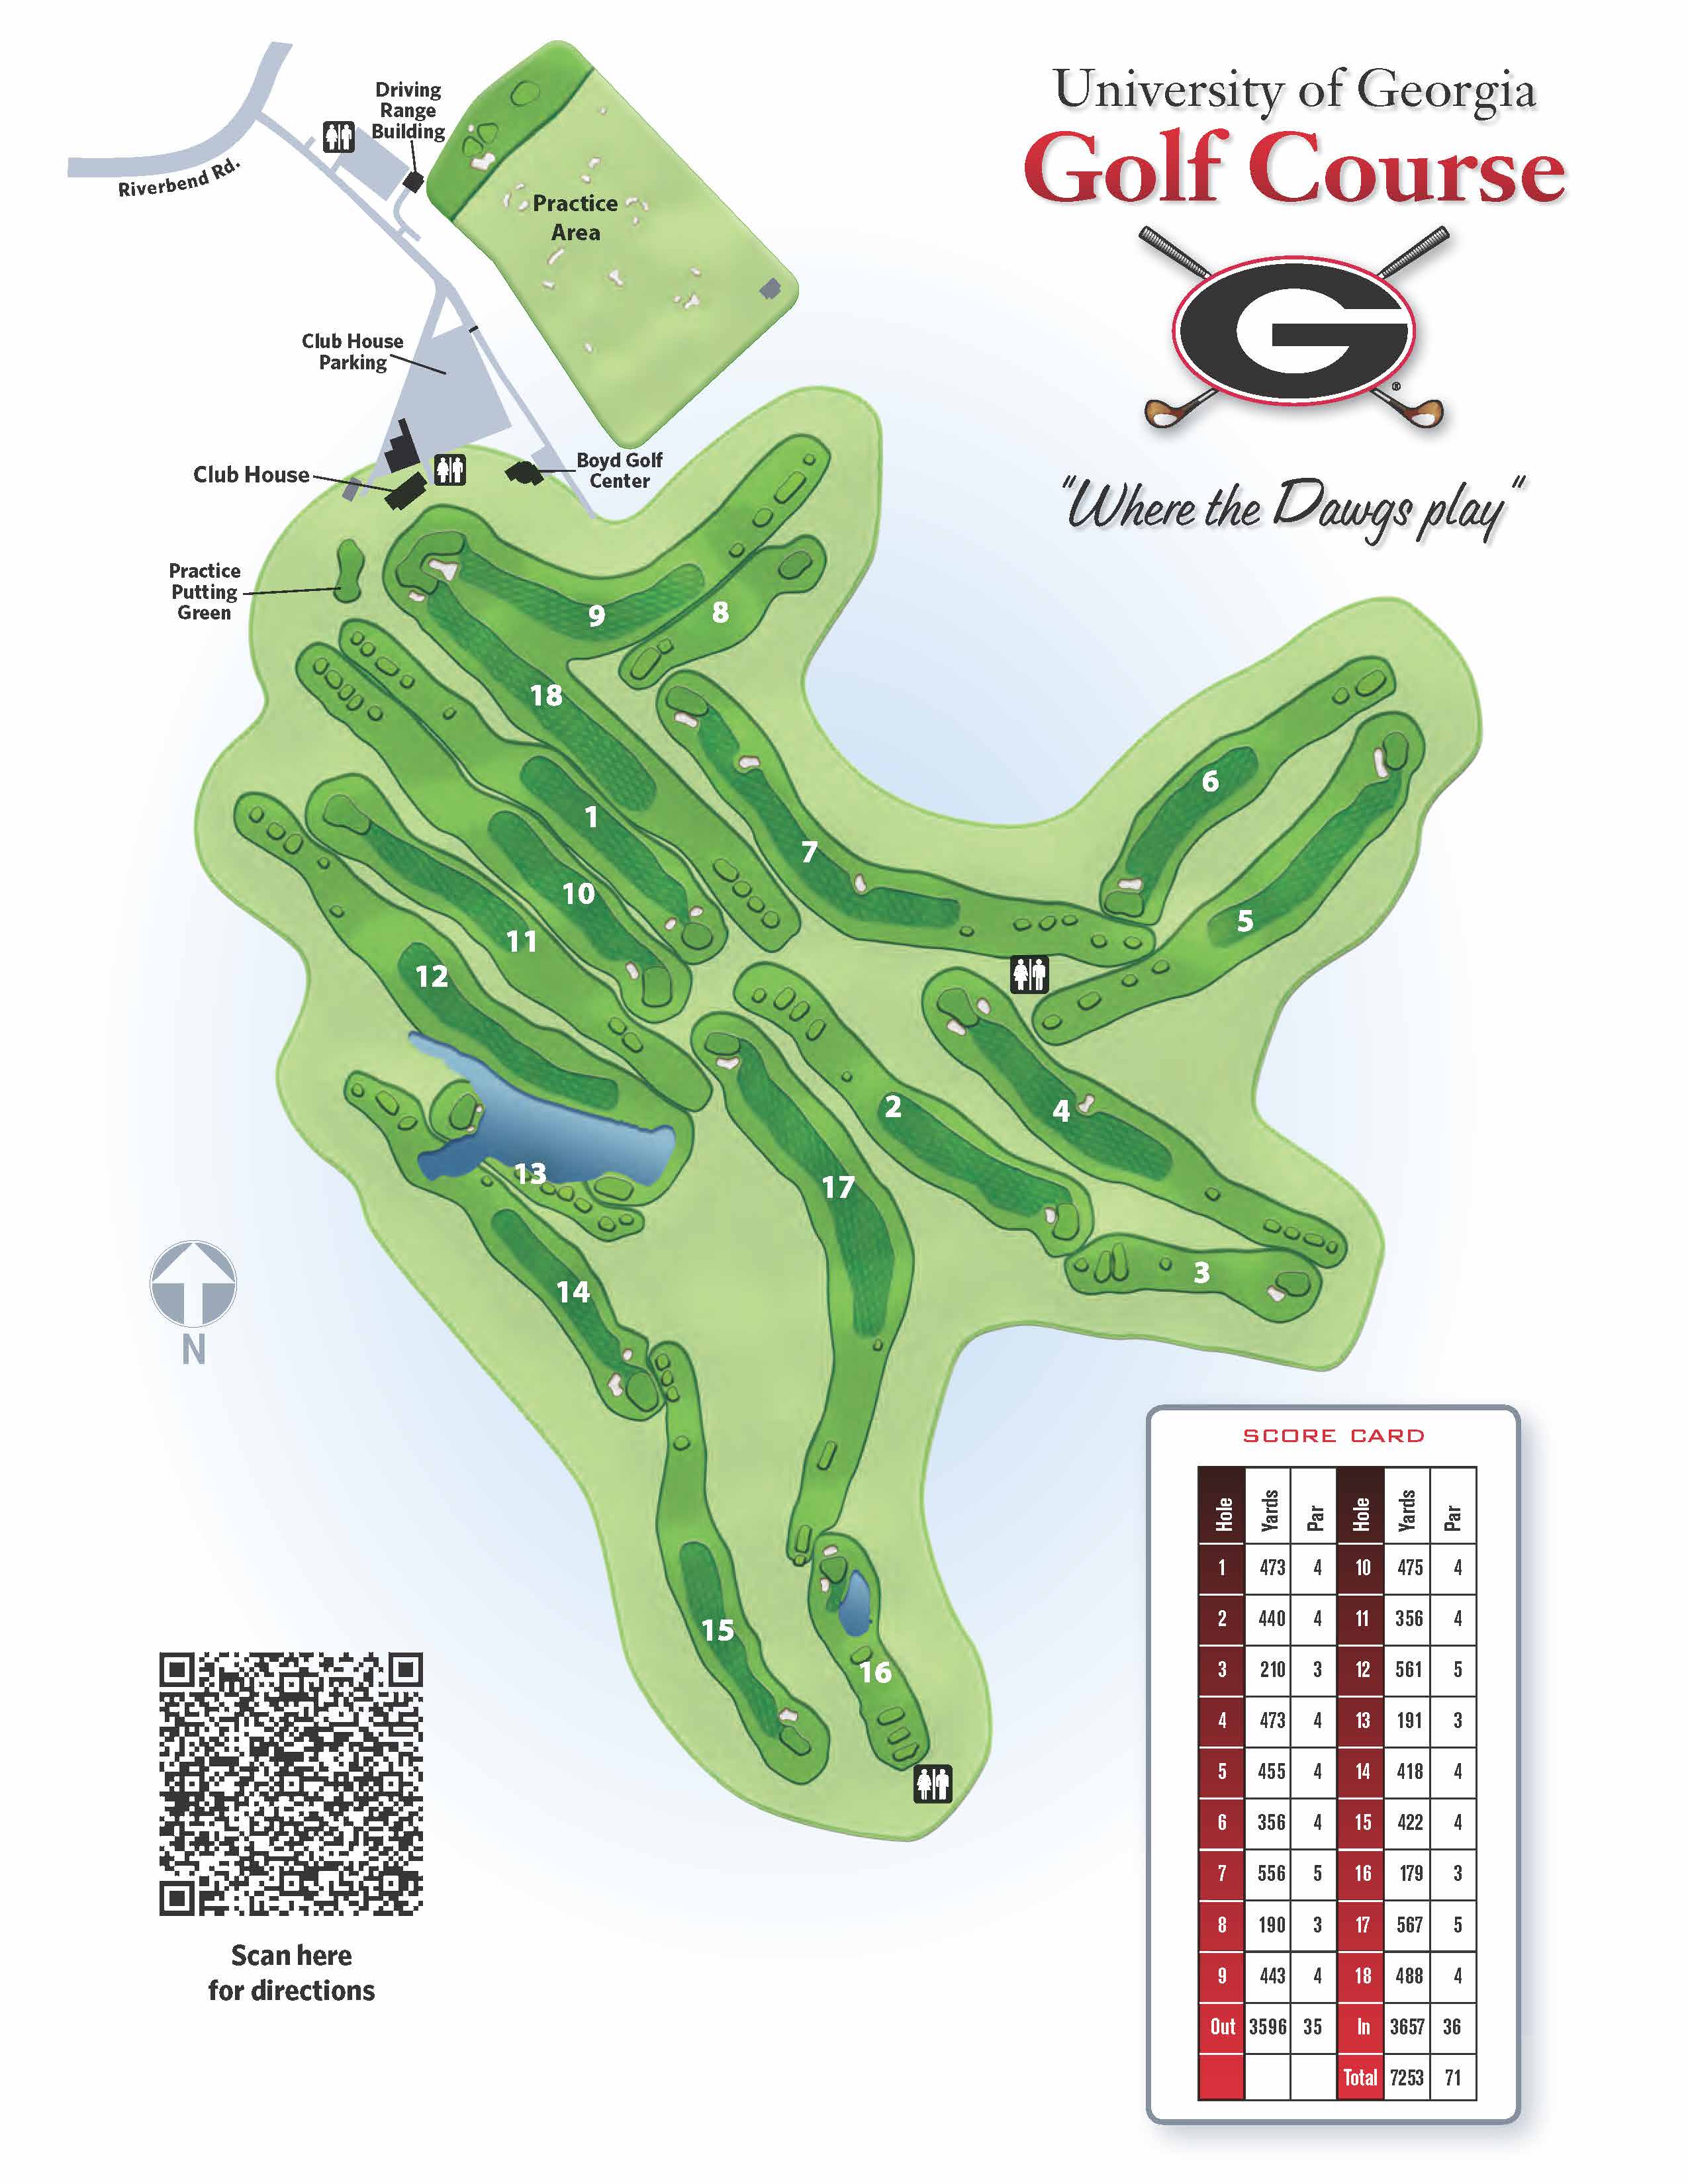 Map of the UGA Golf Course